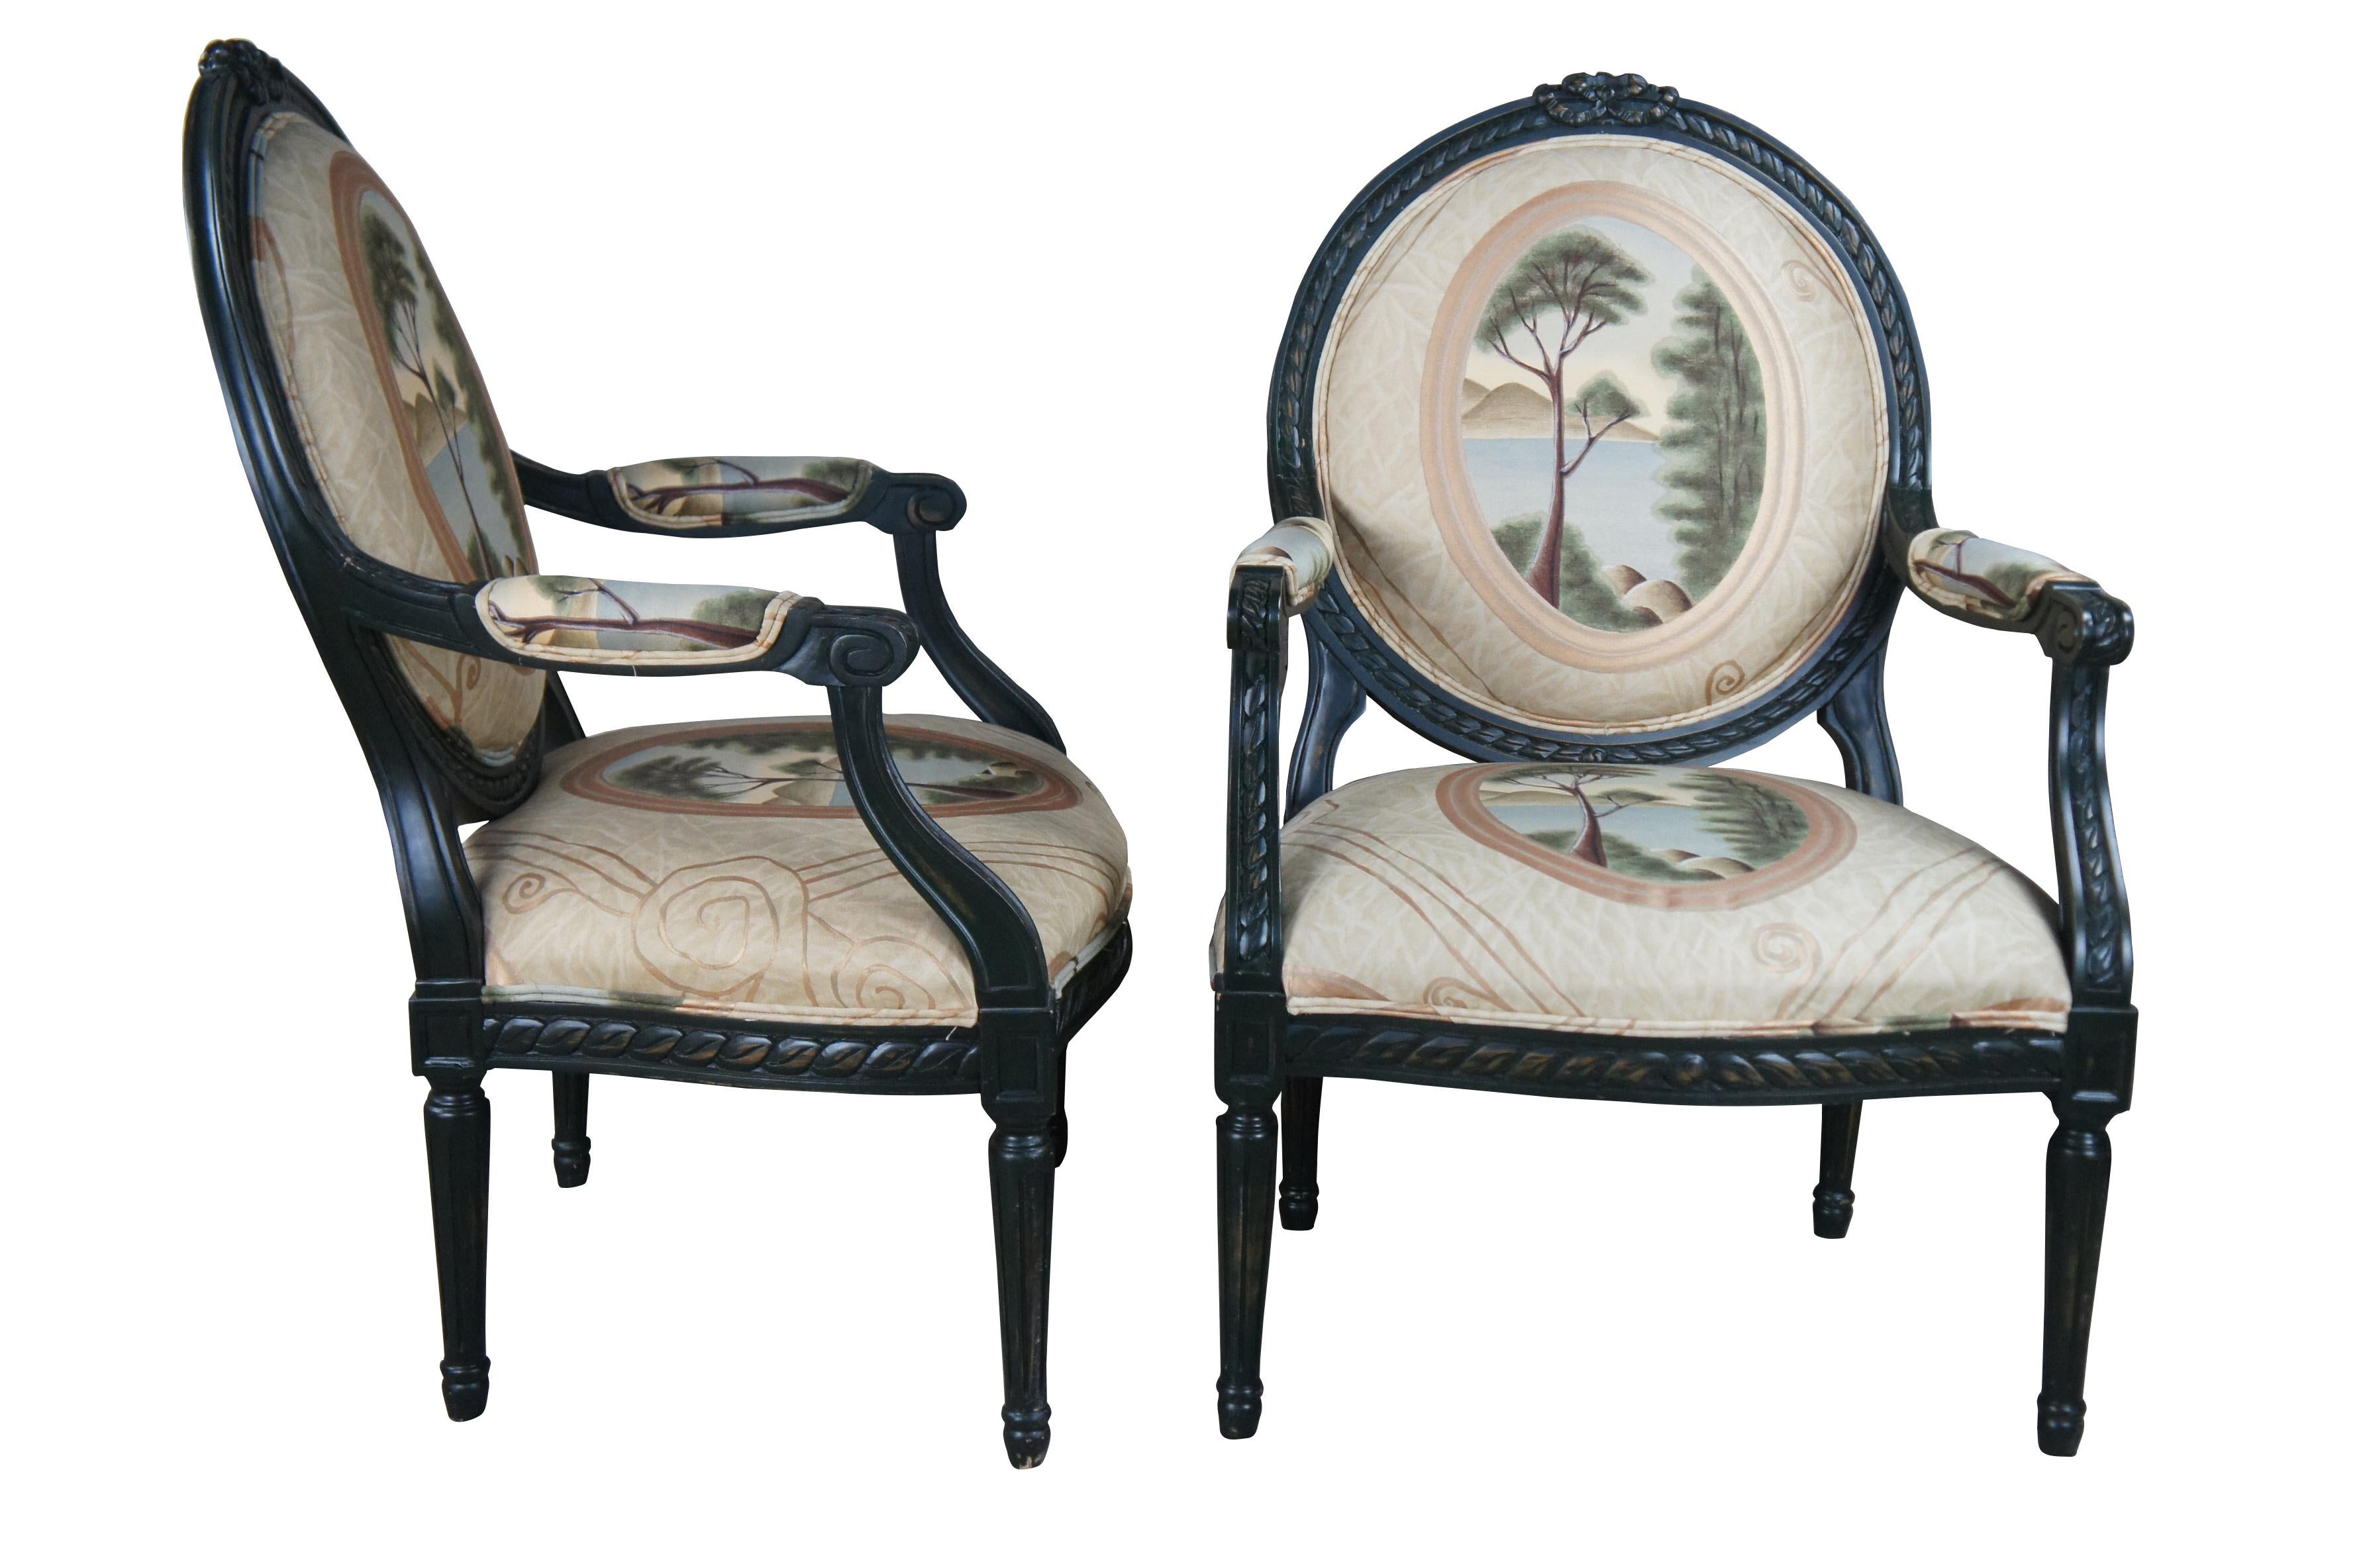 Two vintage Drexel Heritage fauteuil armchairs with French Louis XVI / Neoclassical styling that features an ebonized frame with balloon back ribbon accent, scenic cameo ocean landscape / seascape upholstery and fluted tapered legs.  H1350,